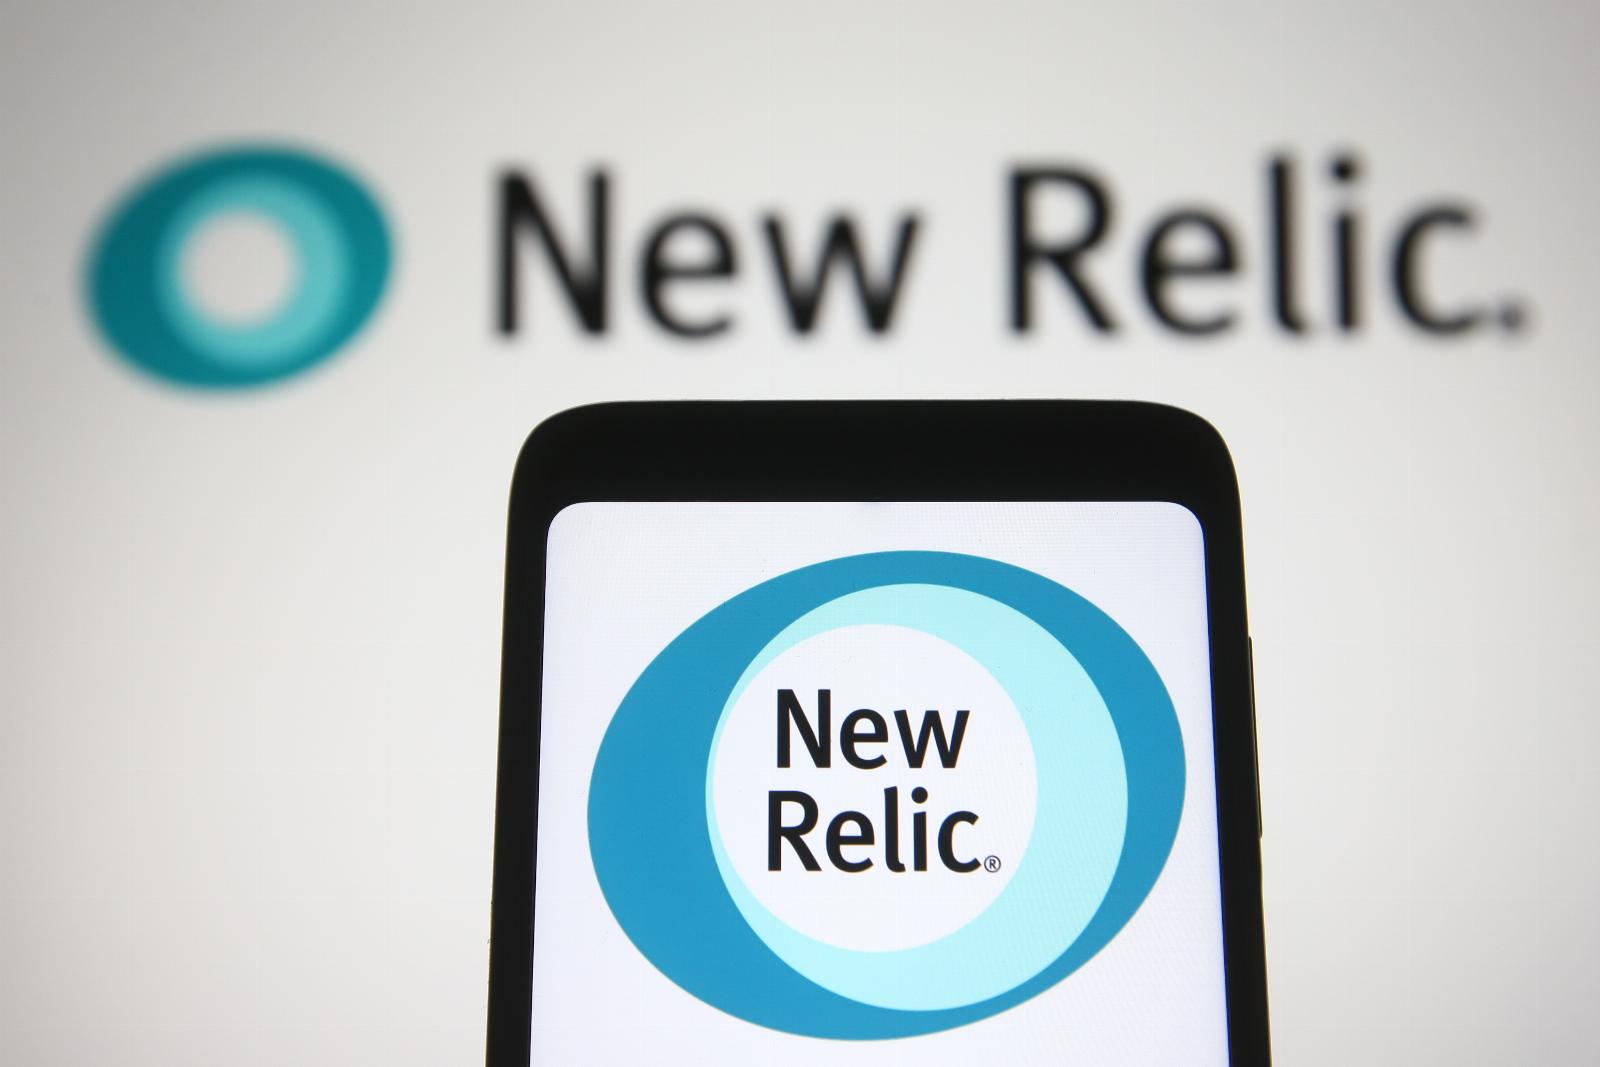 New Relic agrees to go private in $6.5B all-cash deal